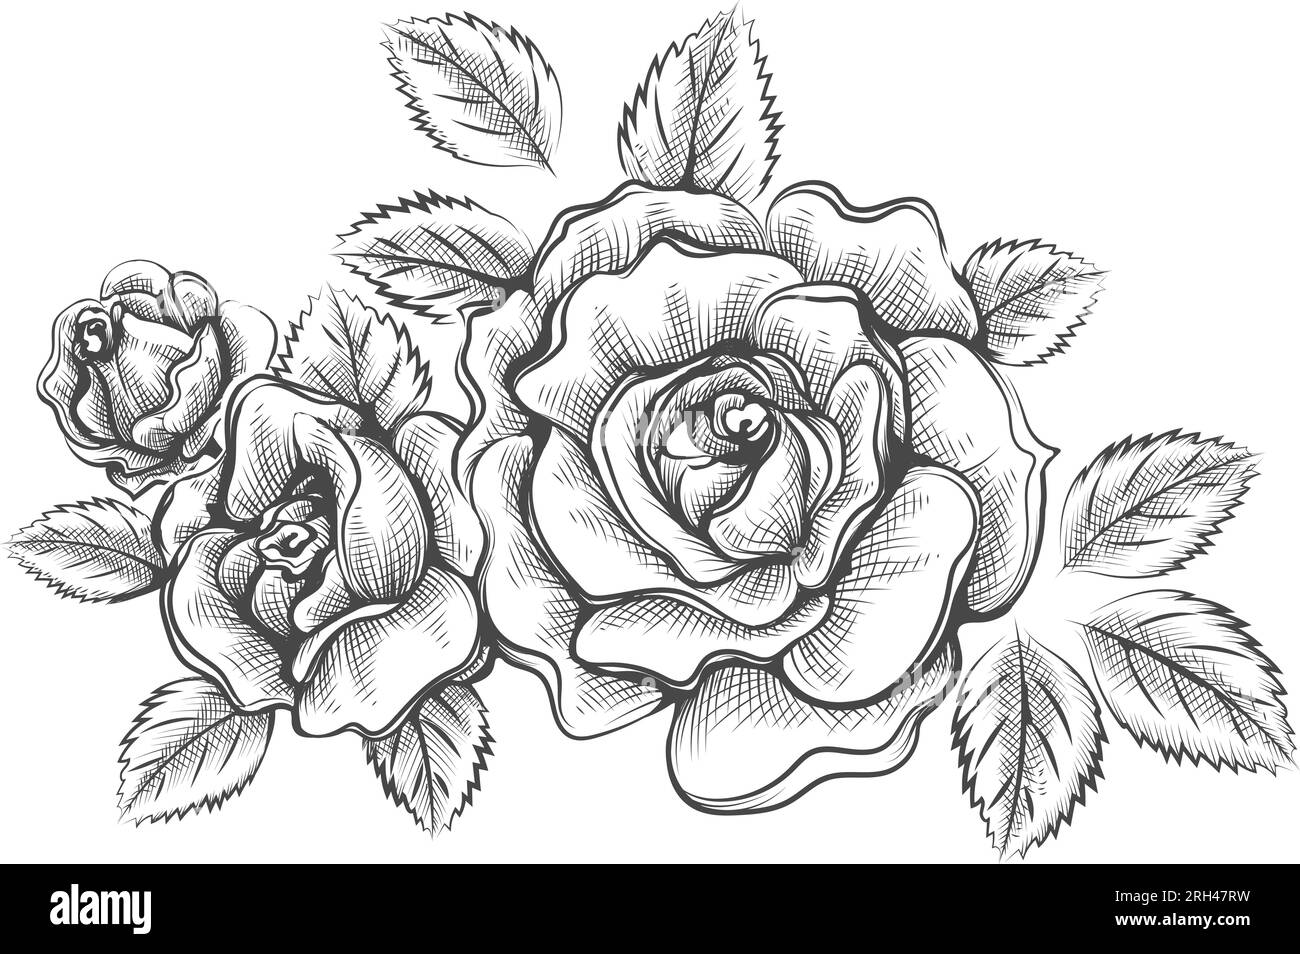 How To Draw A Rose Bud, Rose Bud, Step by Step, Drawing Guide, by Dawn -  DragoArt